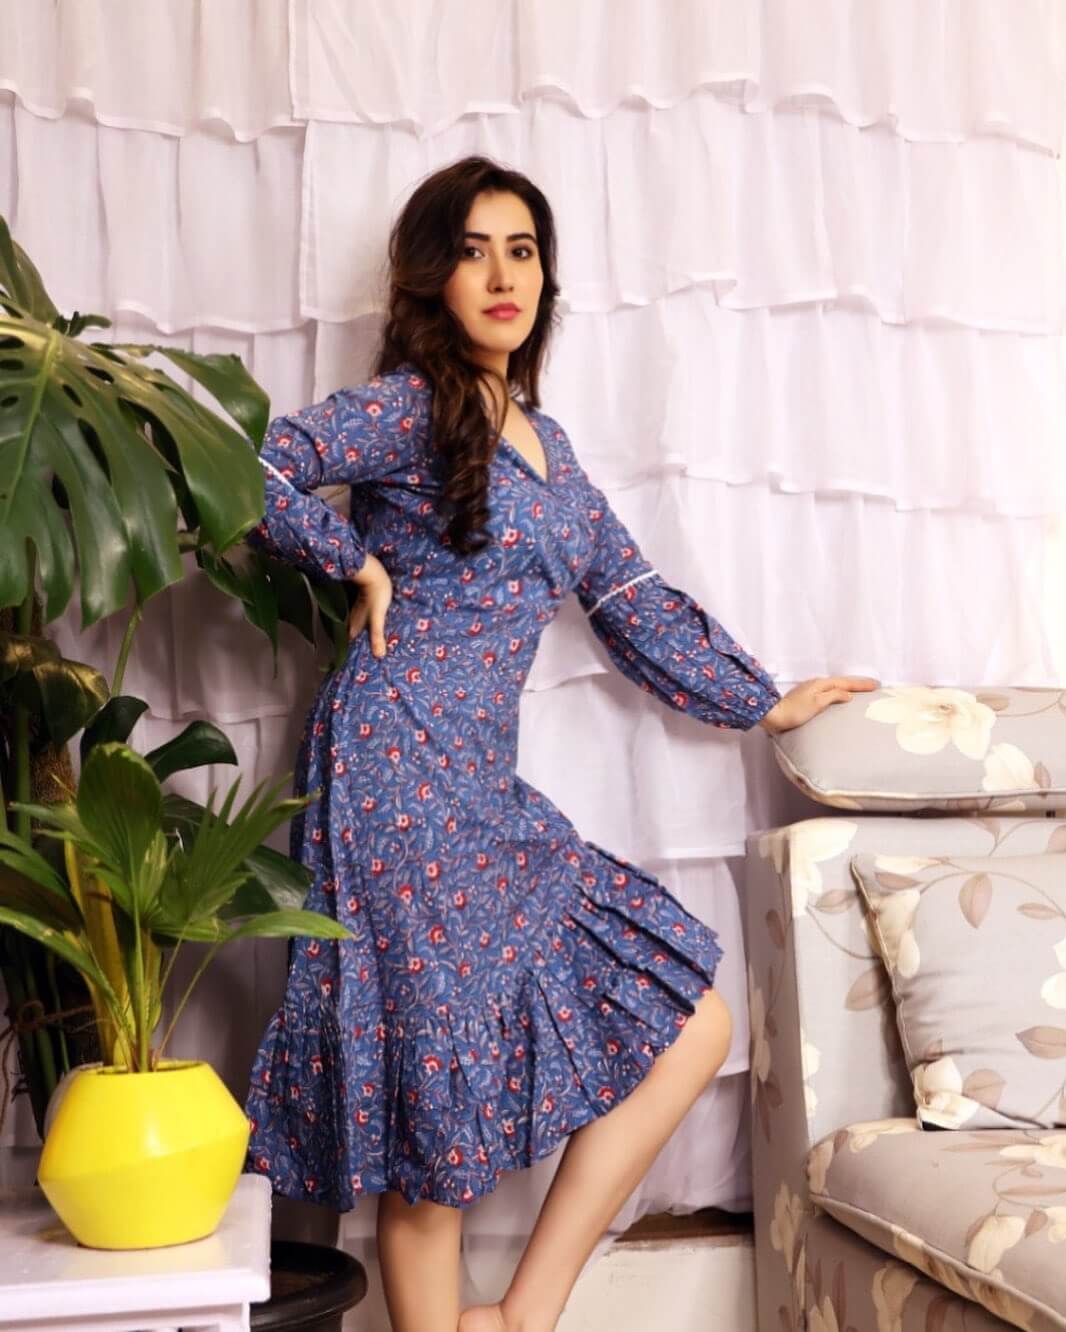 Sheena Look Beautiful In a Casual Knee Length Blue Dress Outfit